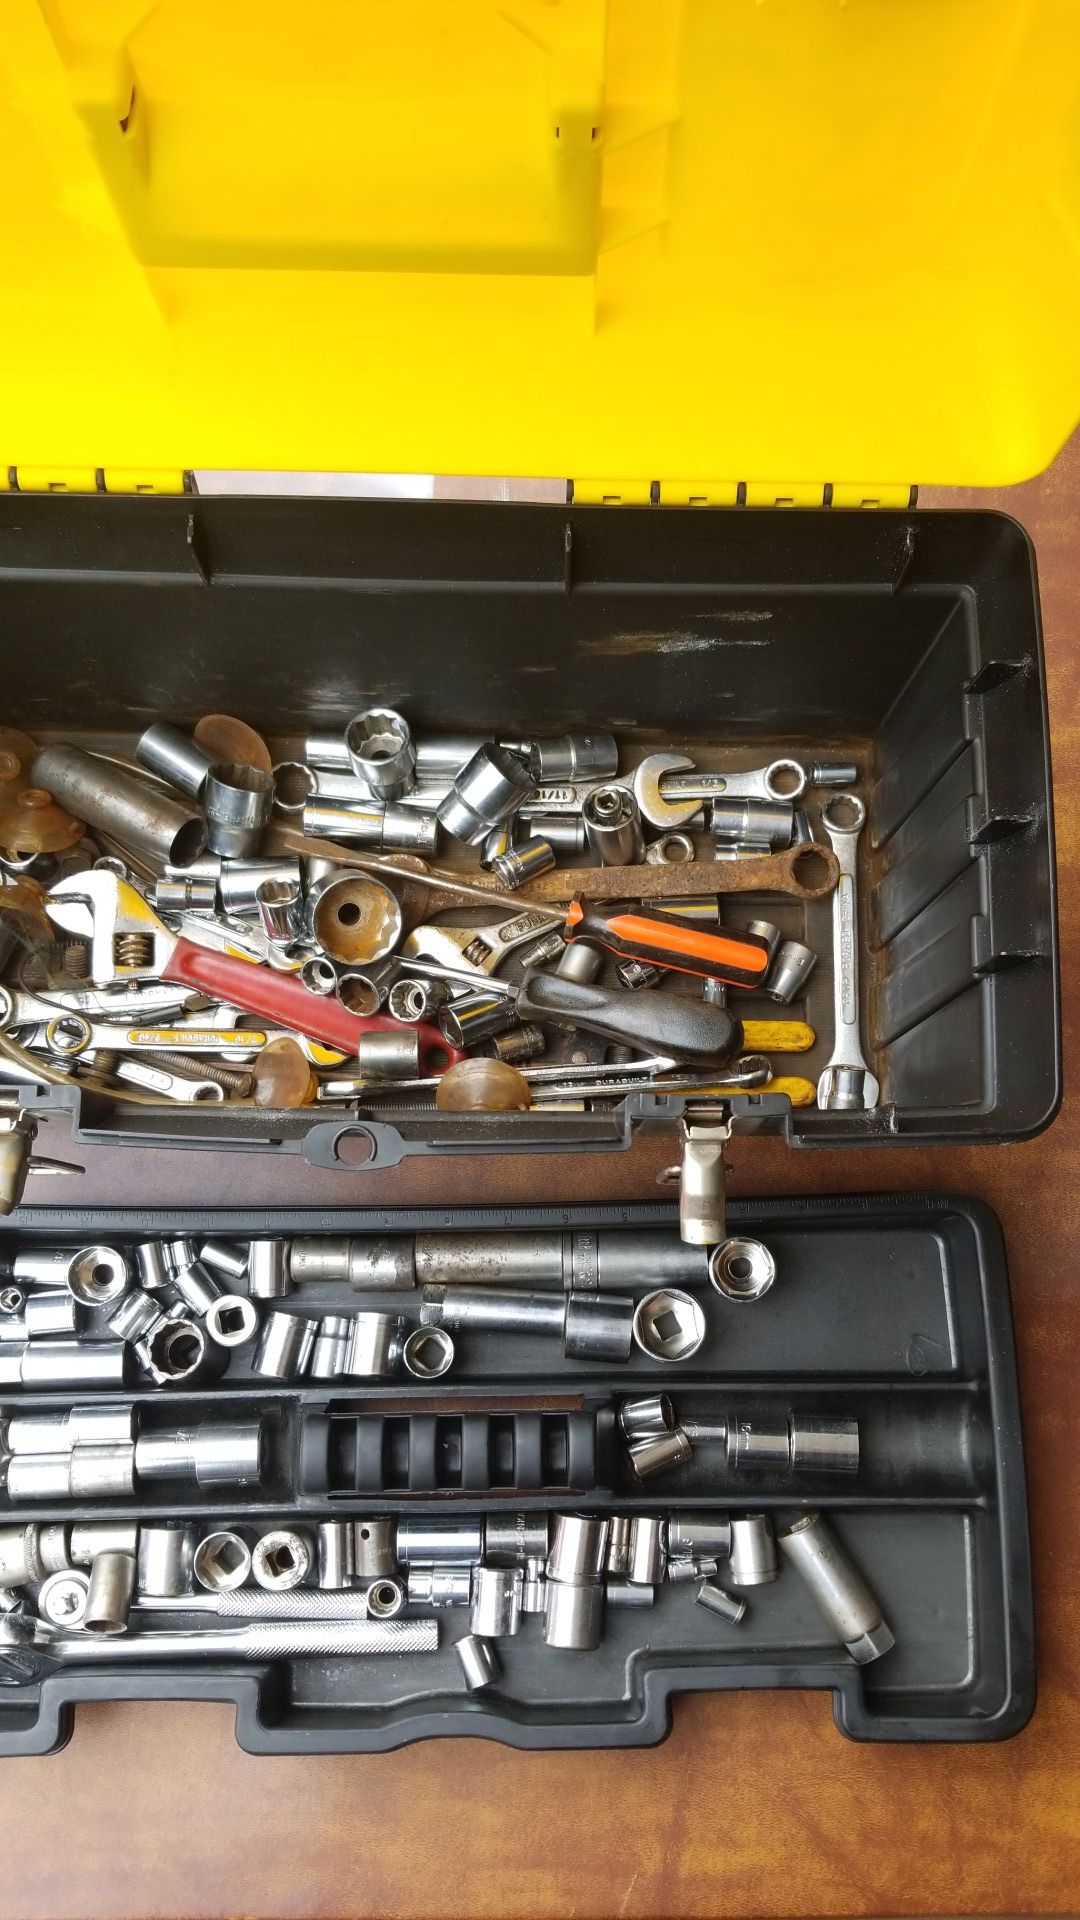 Tool Box wth tools sockets wrenchs and ratchets